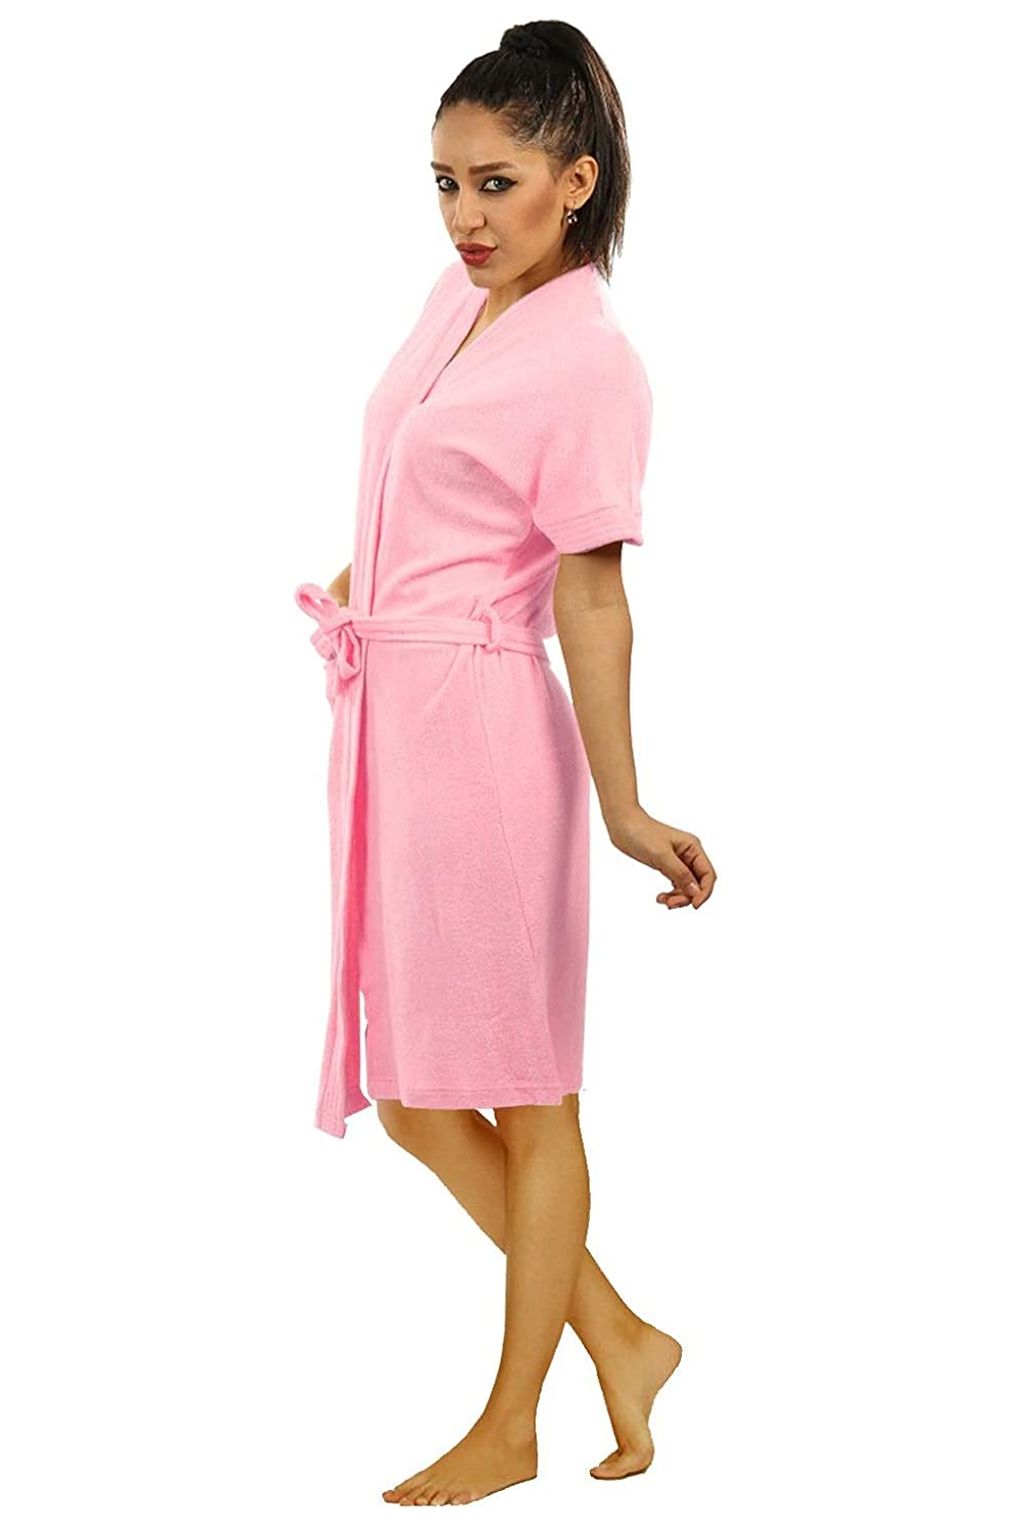 Bath Robes - Towelling & Cotton Robes | Sheridan